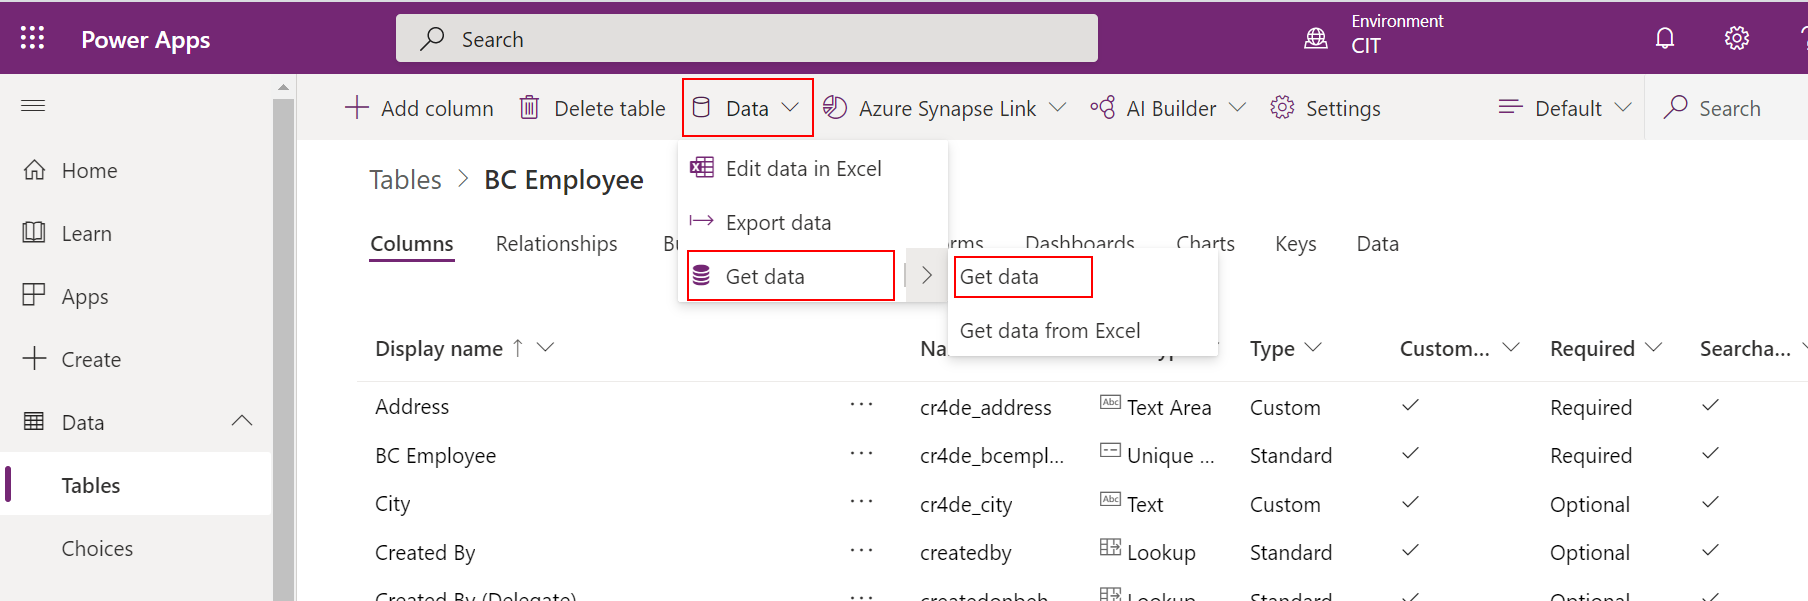 Integrating PowerApps Portal With Business Central using Power Automate-7